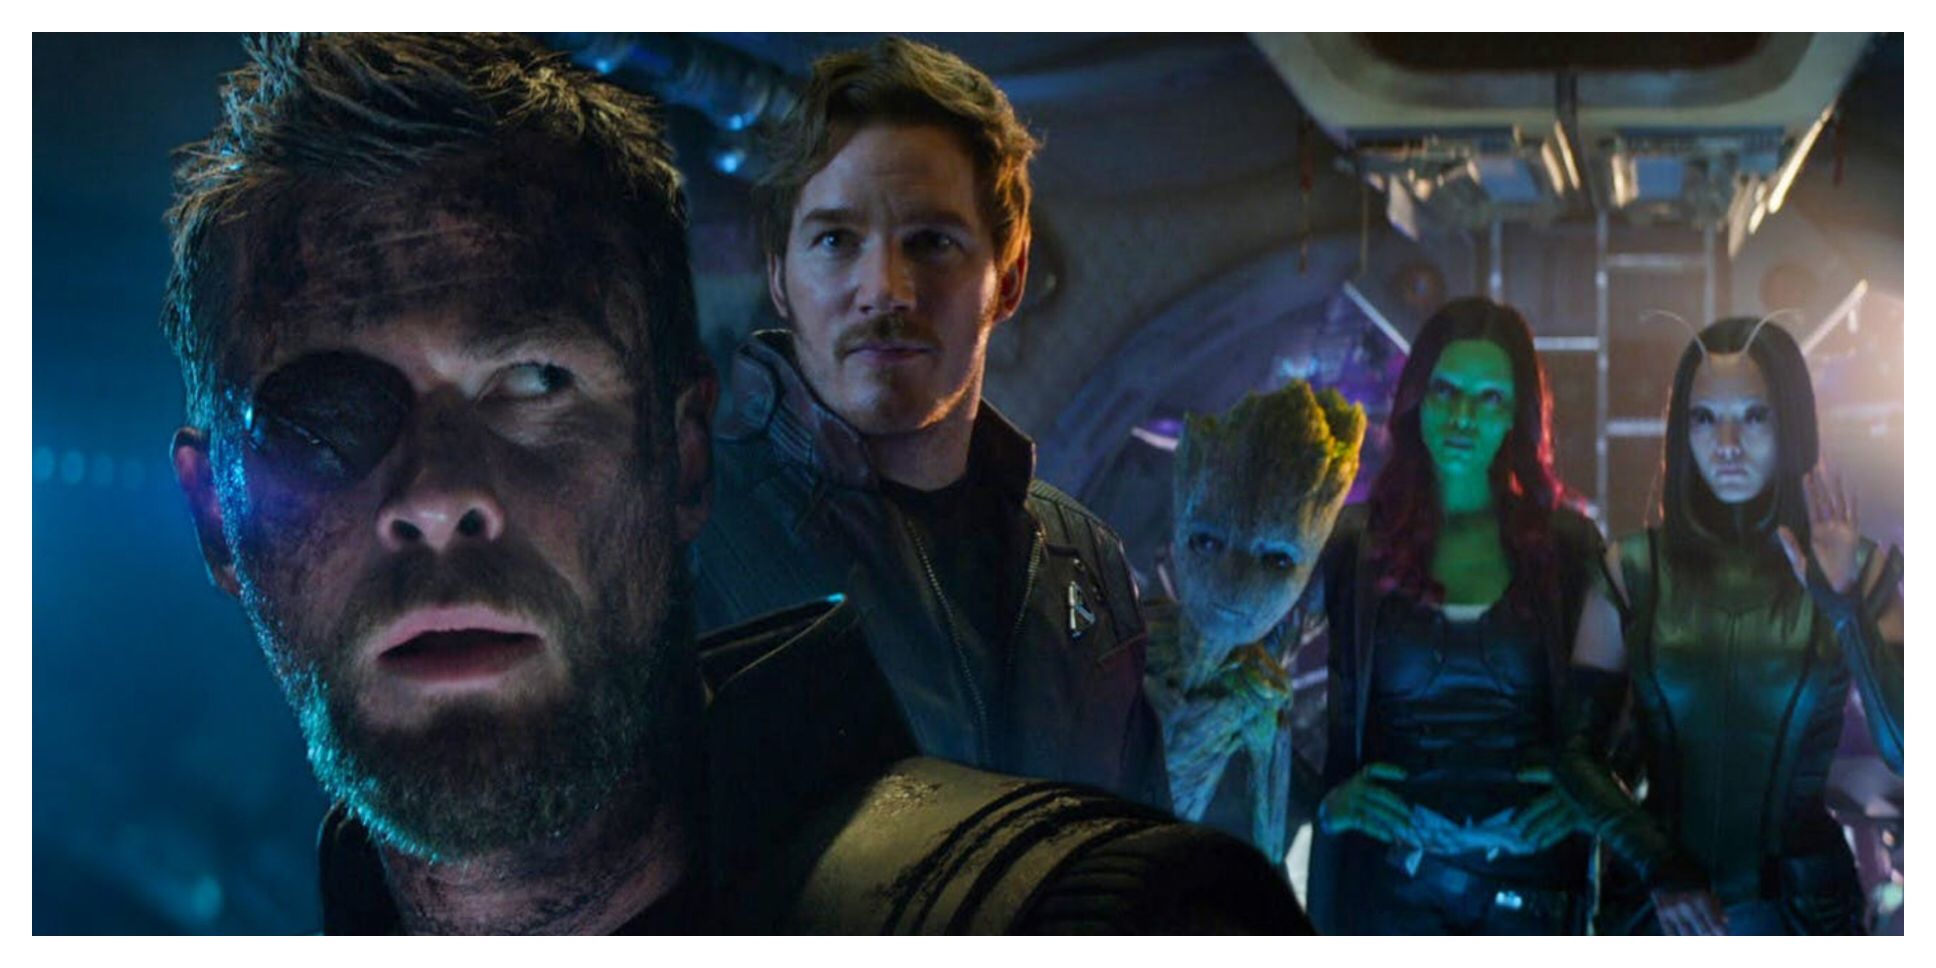 Thor Meets the Guardians of the Galaxy